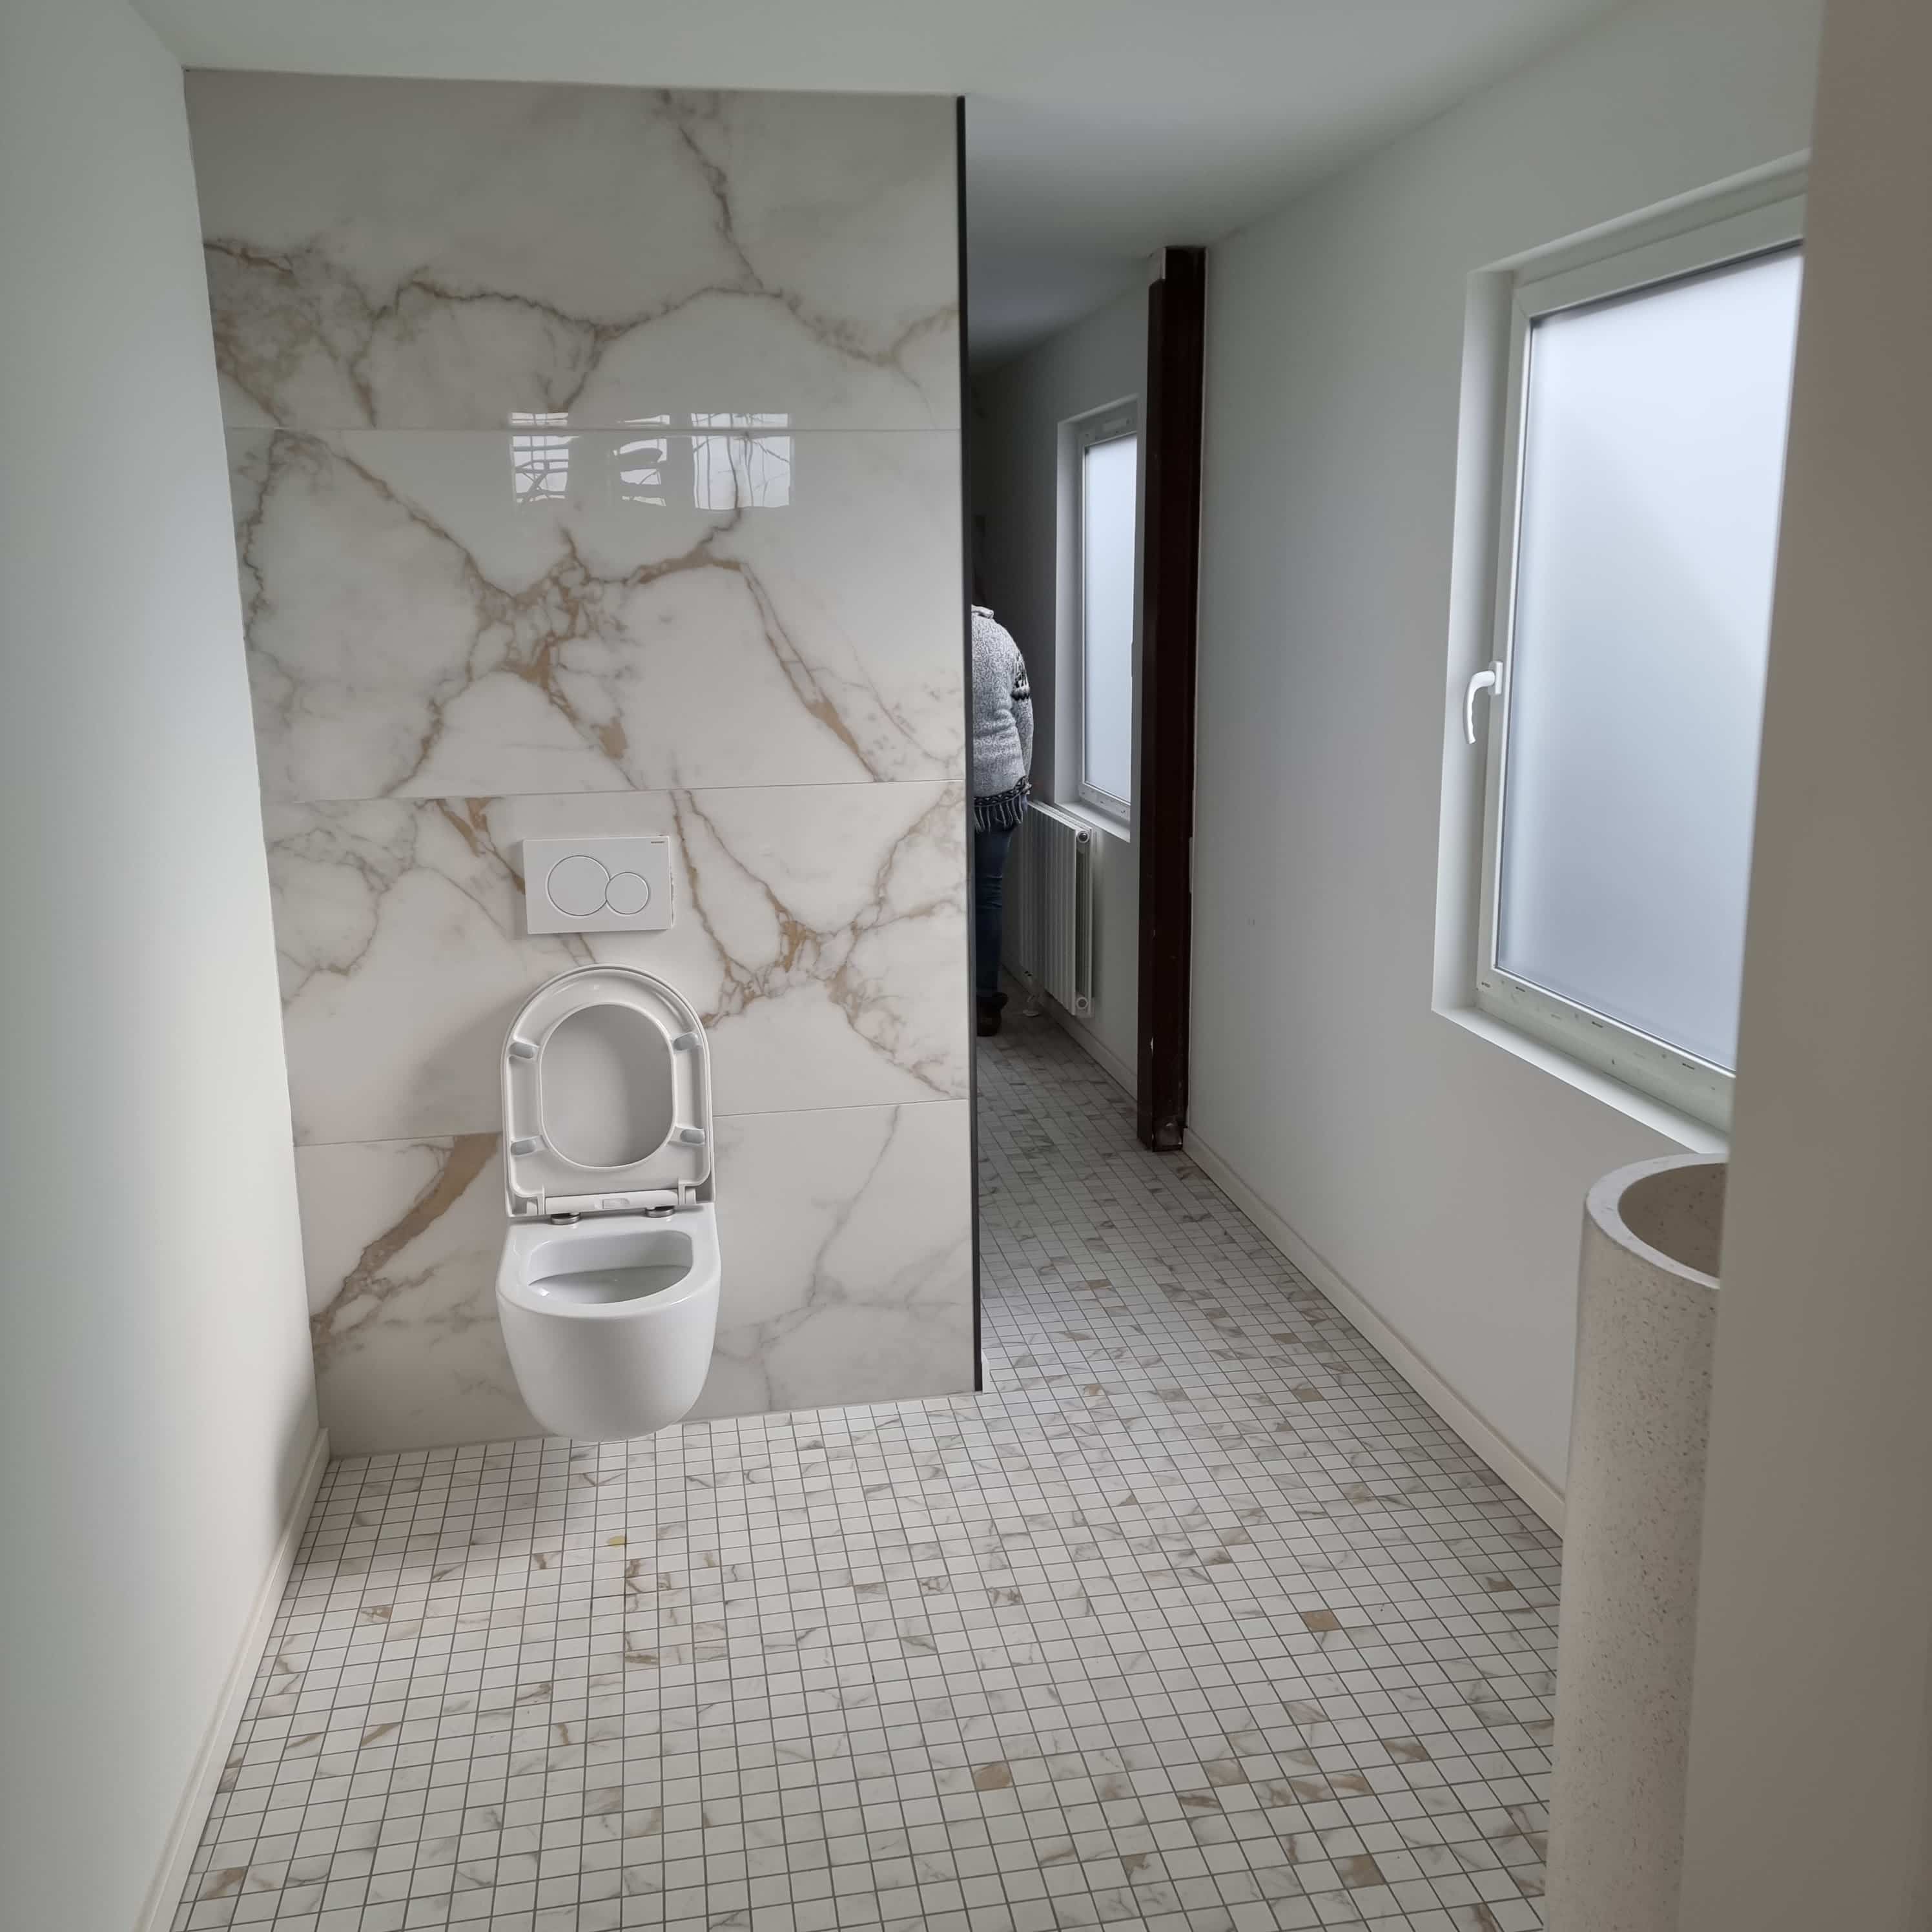 A toilet with white marble tiles and white floor